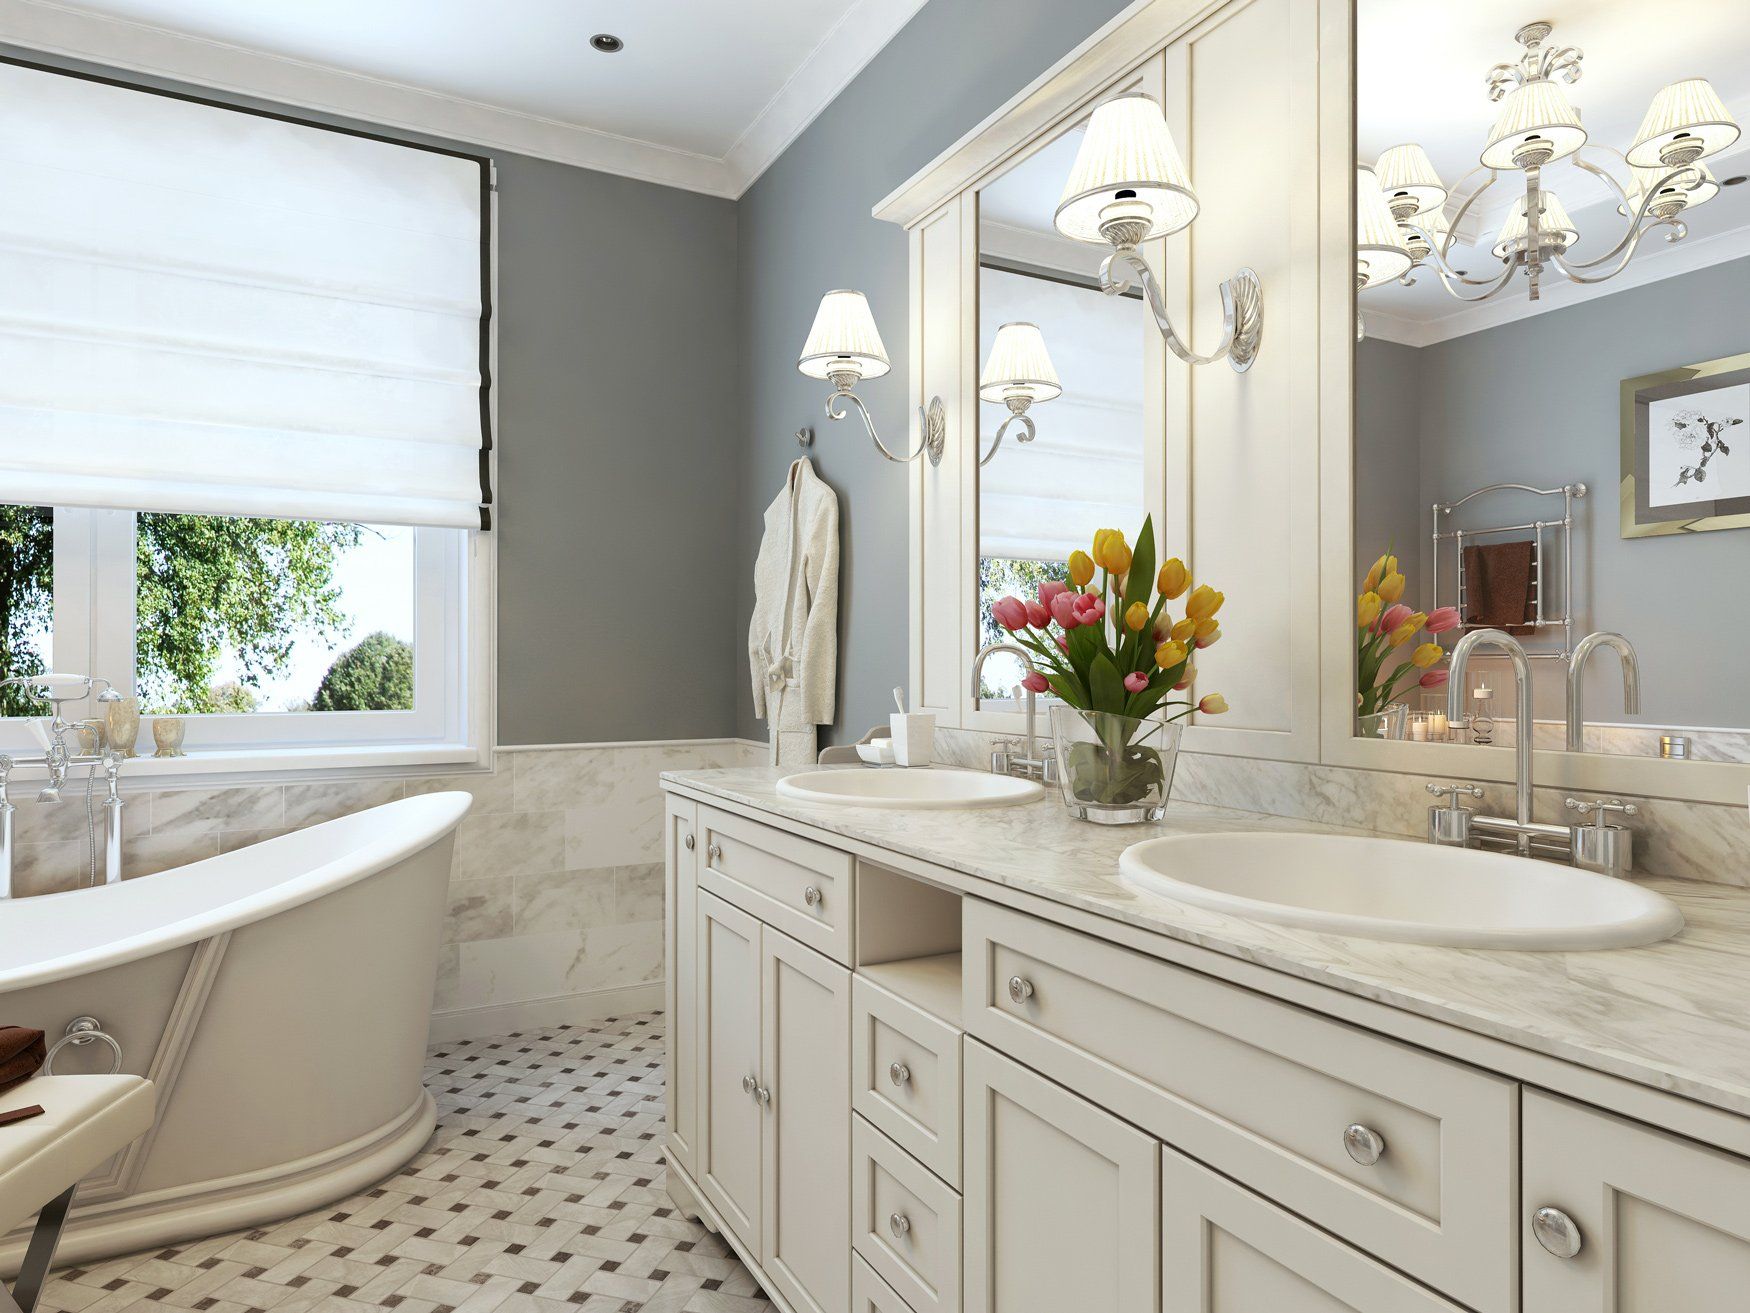 3 Ways Paint Will Make Your Bathroom Look Larger